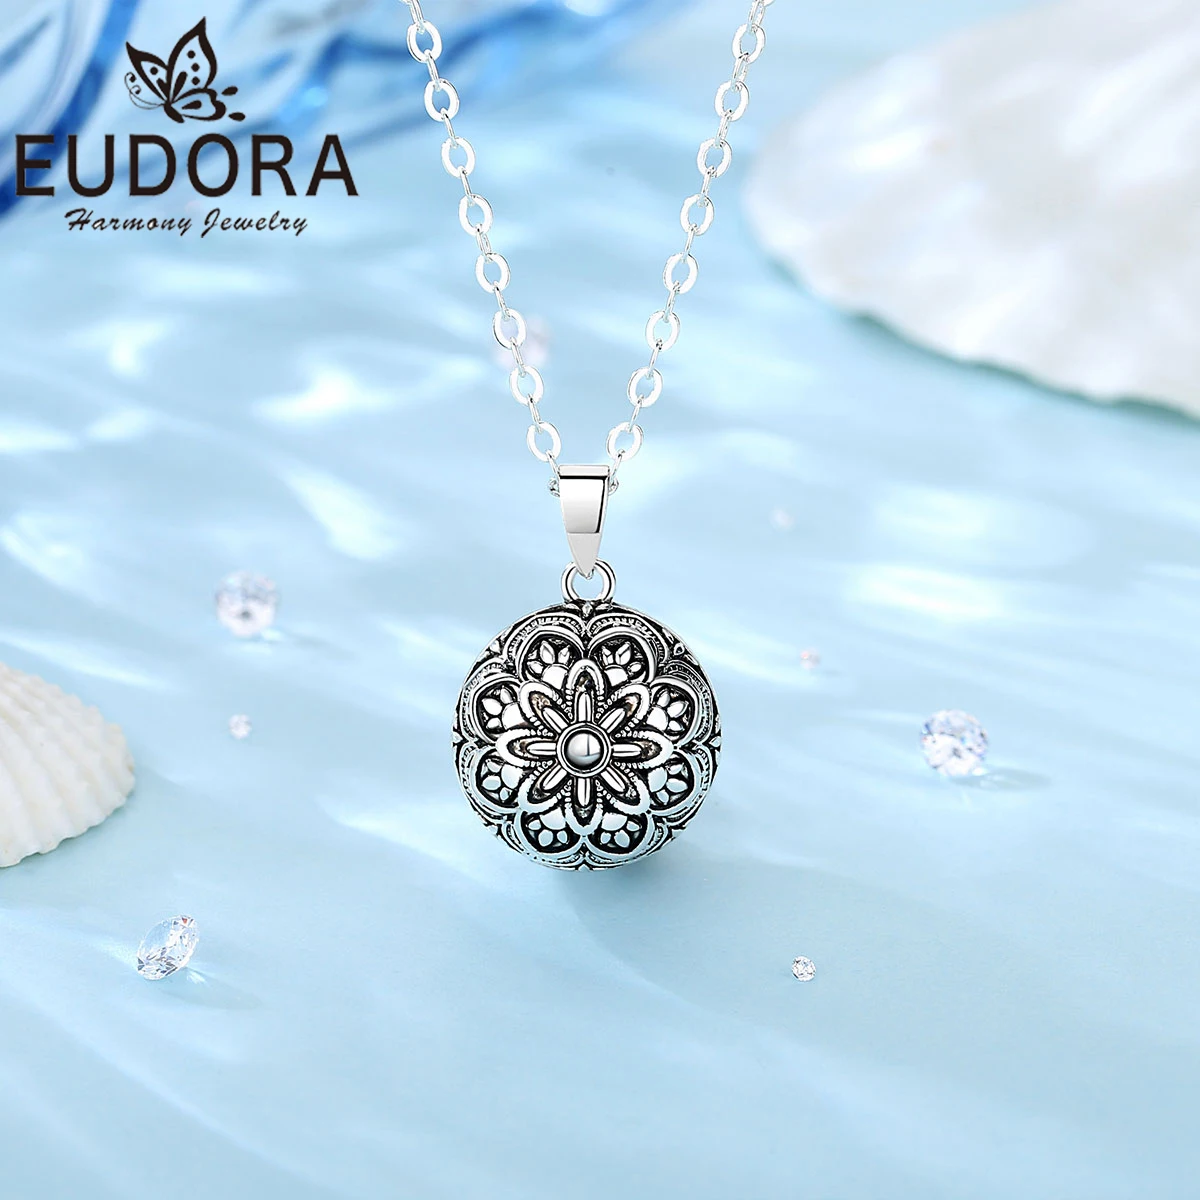 

Eudora 20mm Harmony Ball Flower Pendant Pregnancy Bola Angel Caller Baby Wishing Chime Ball Necklace Fine Jewelry for Women GIft